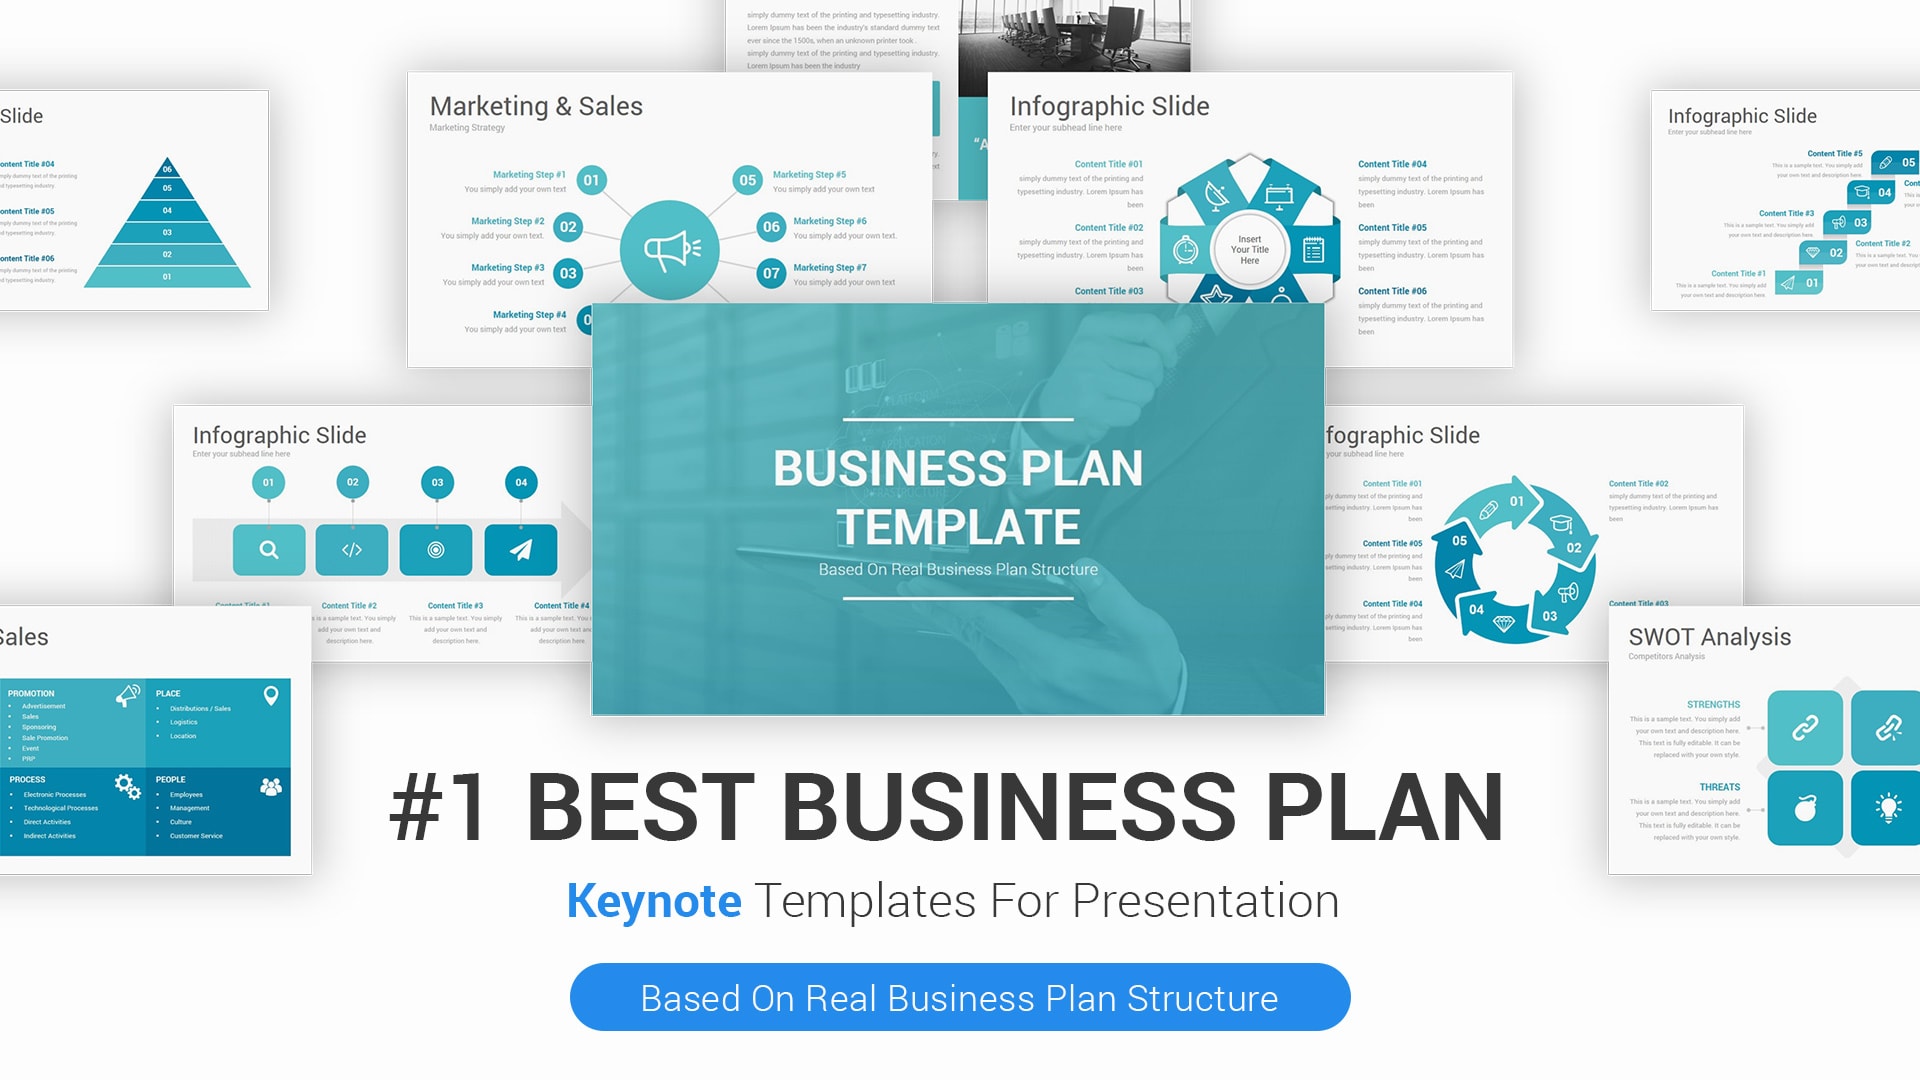 Best Business Plan Keynote Template For Presentations